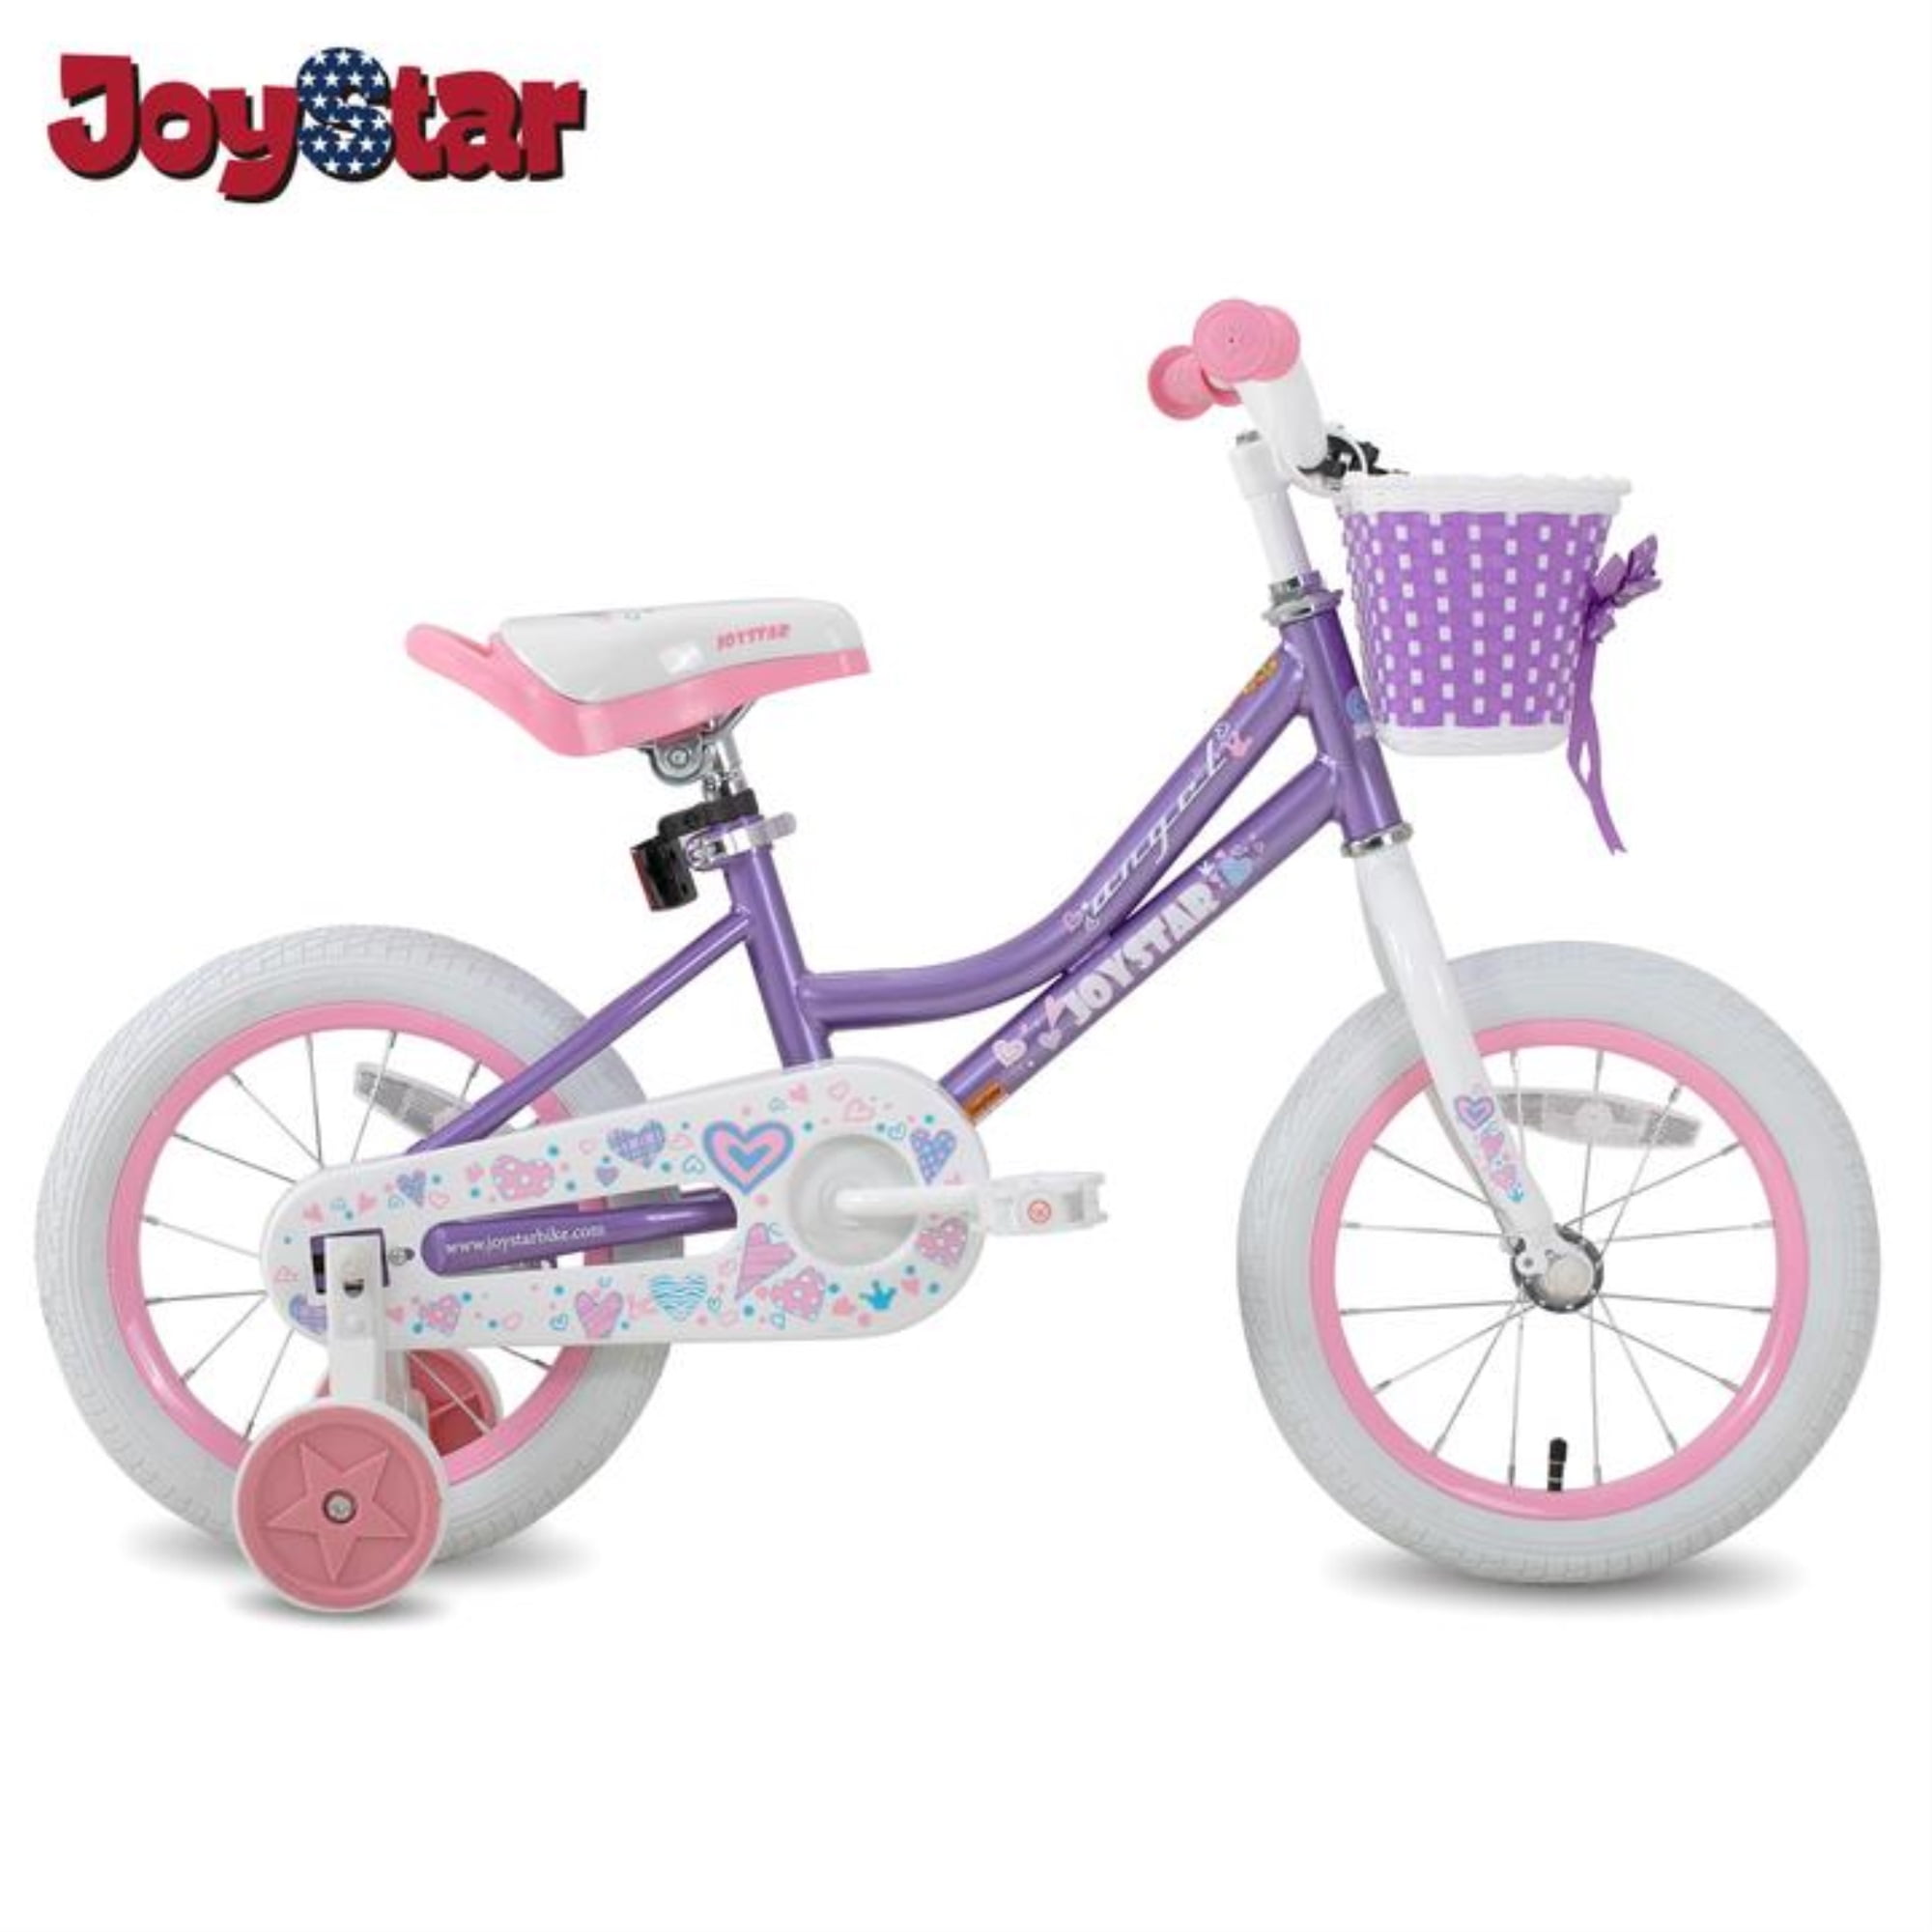 Details about   Training Wheels for 12 18 16 20 14 inch Bike Bicycle Kids Stabilizers Heavy Duty 